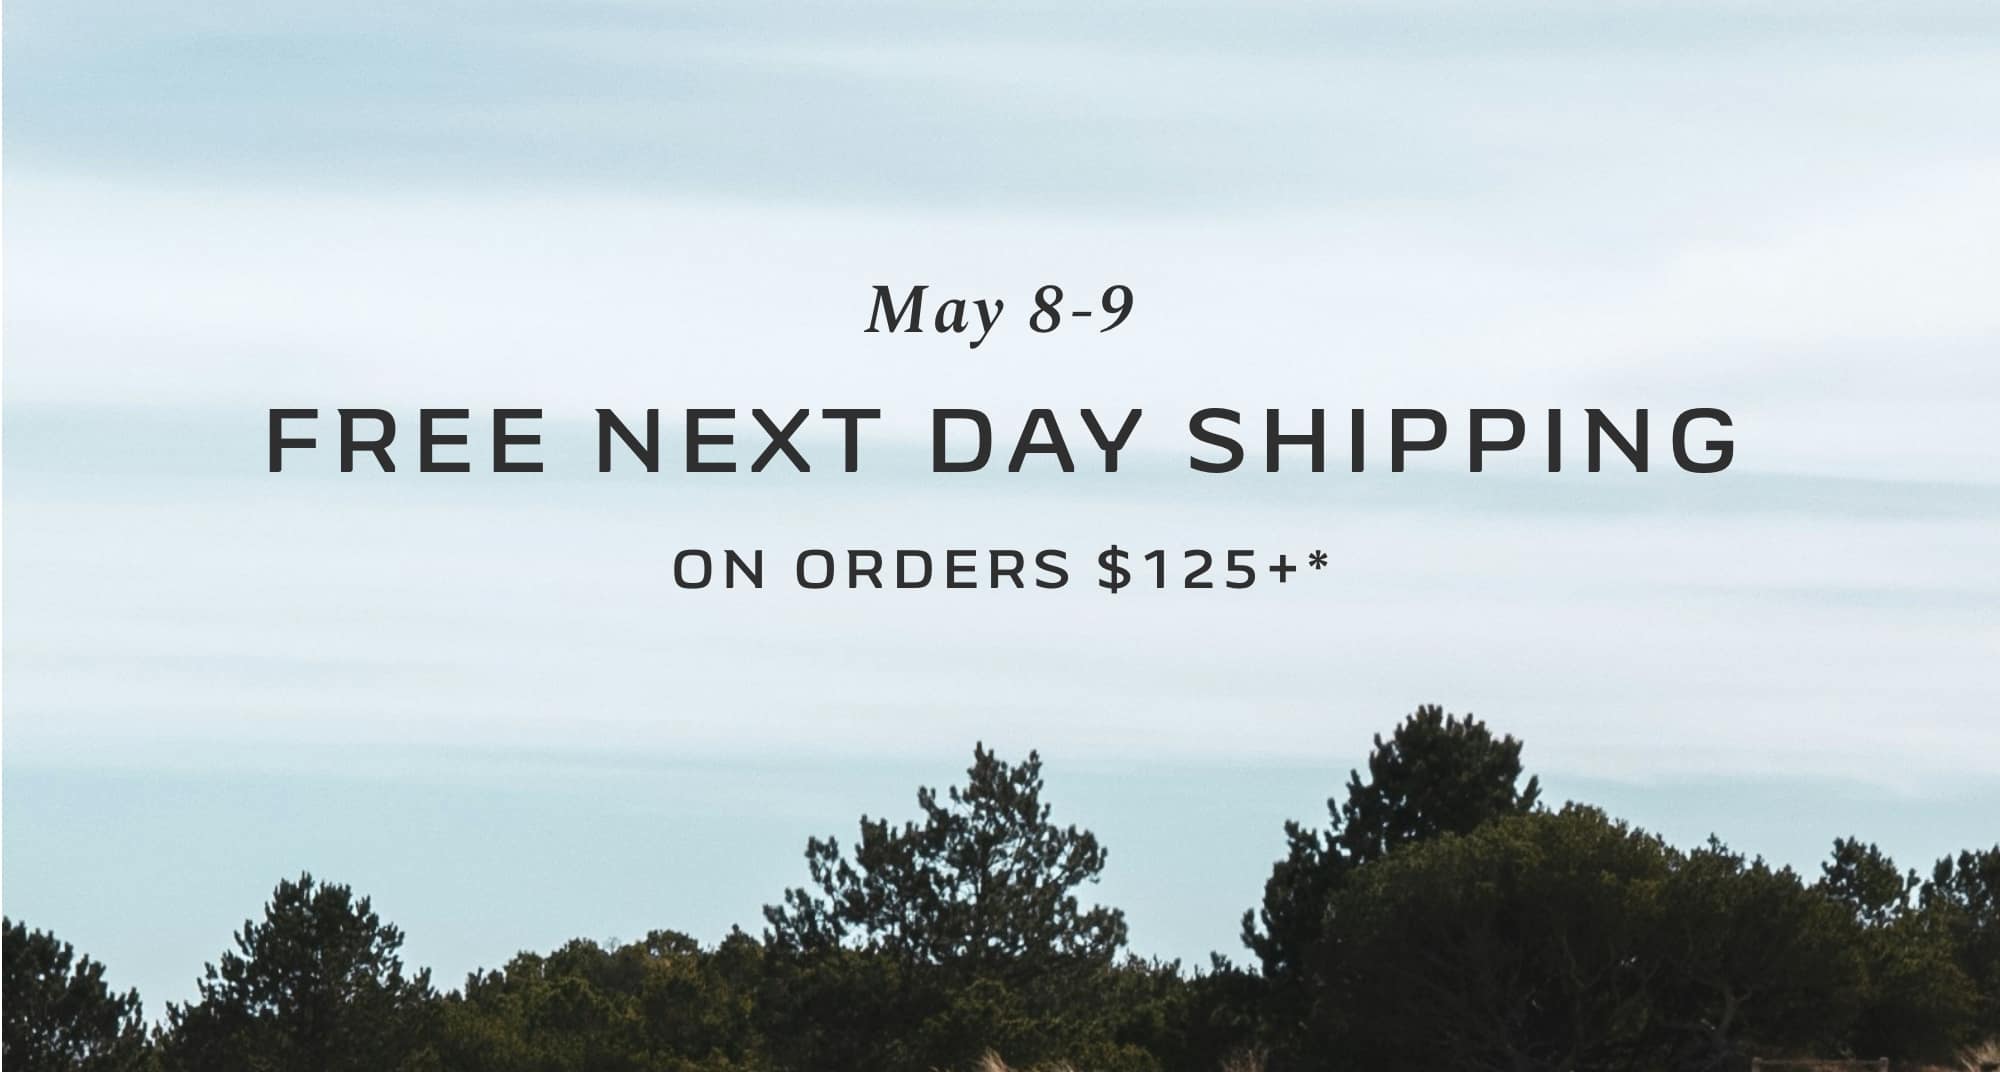 FREE NEXT DAY SHIPPING ON ORDERS $125+*